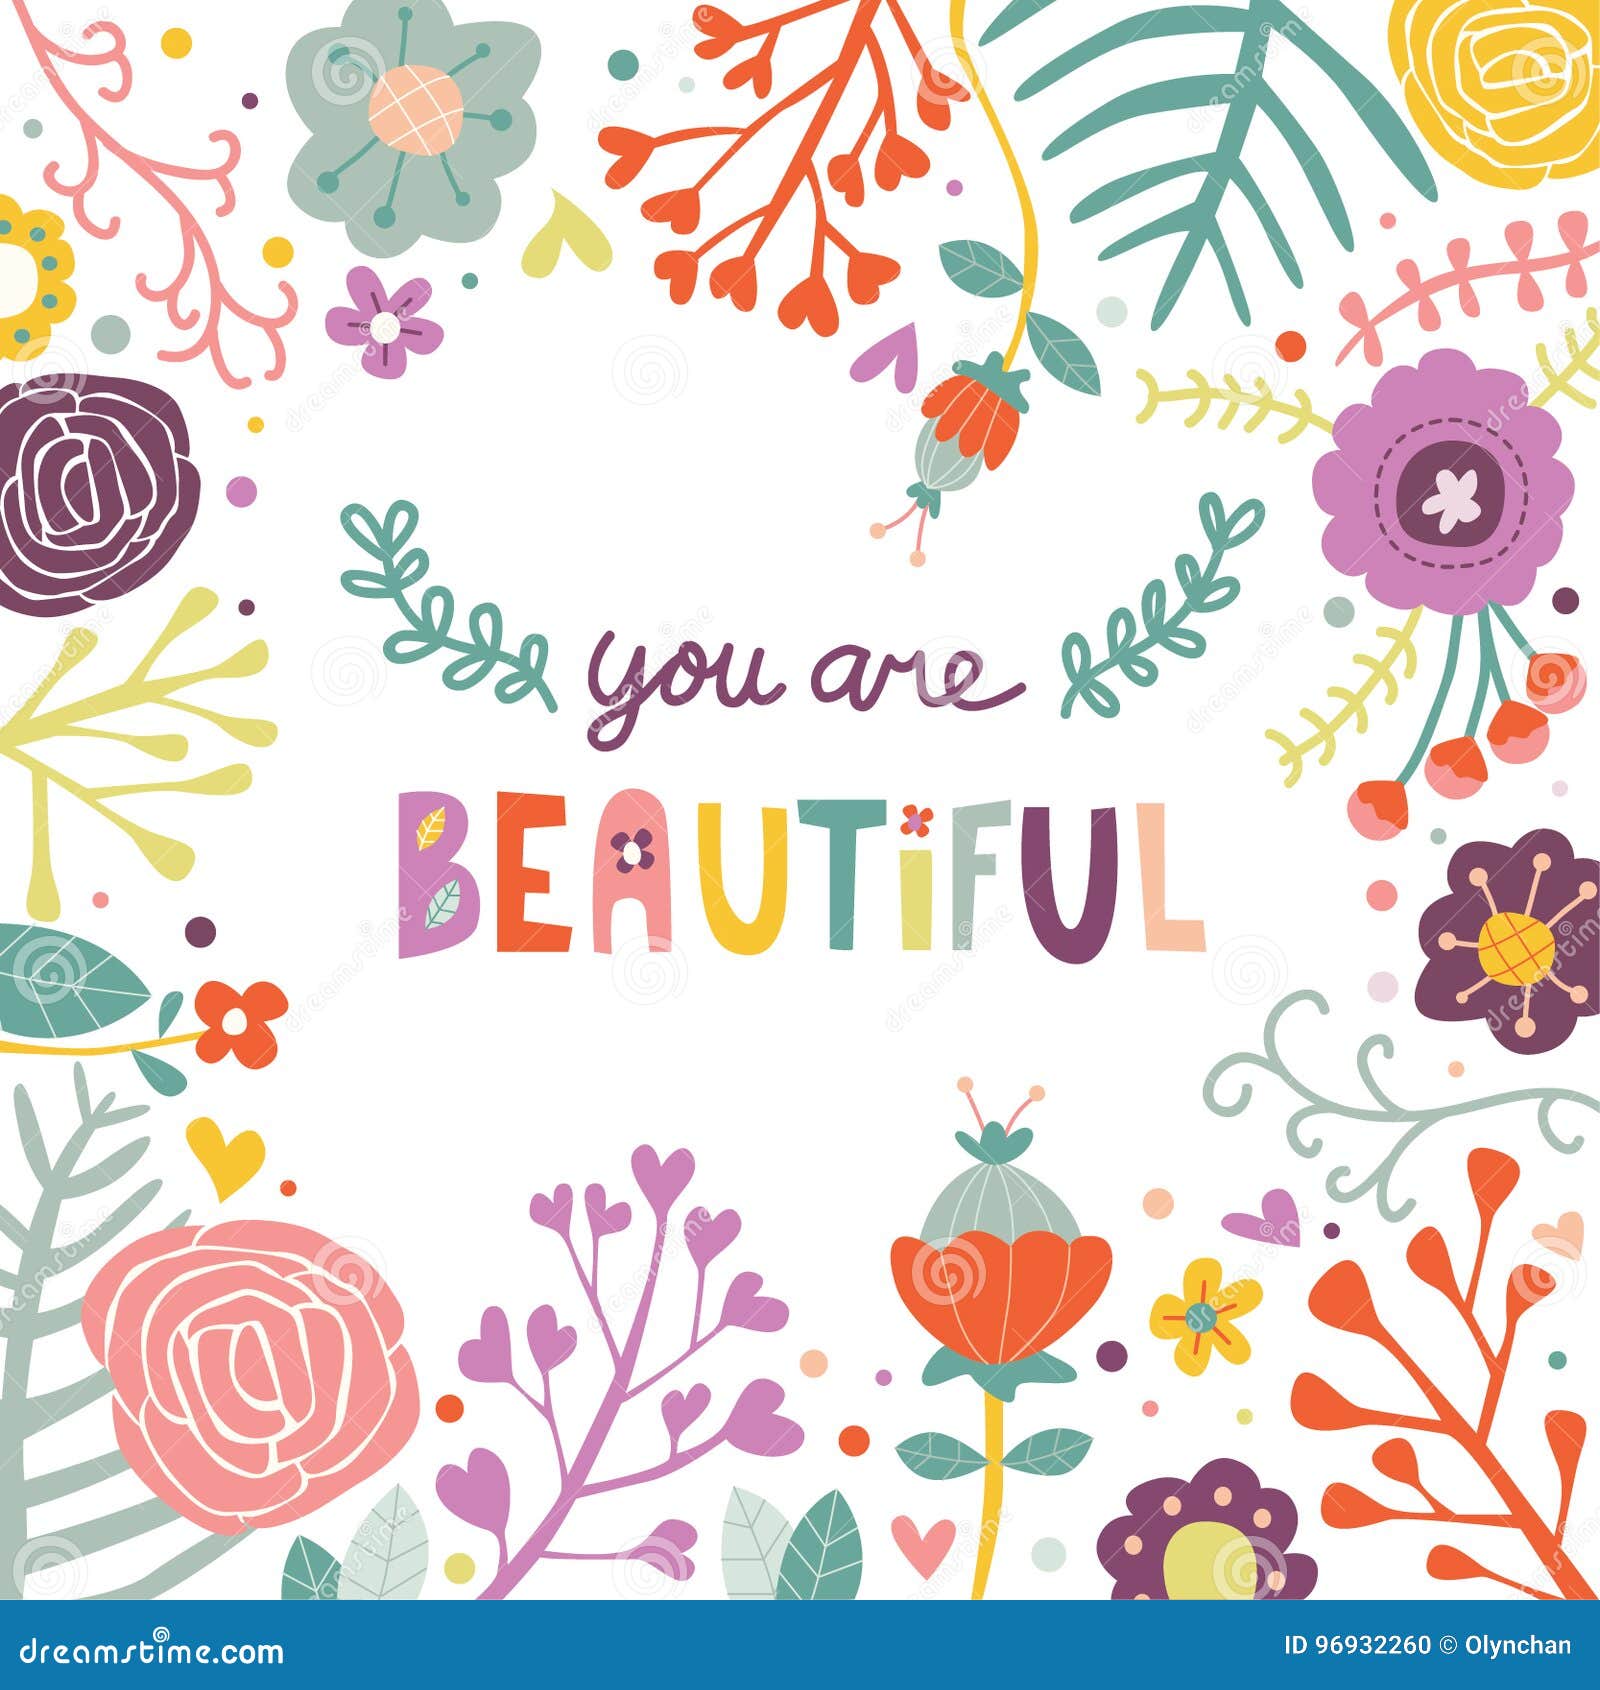 You are Beautiful Greeting Card Cute Flower Doodle Vector Illustration ...